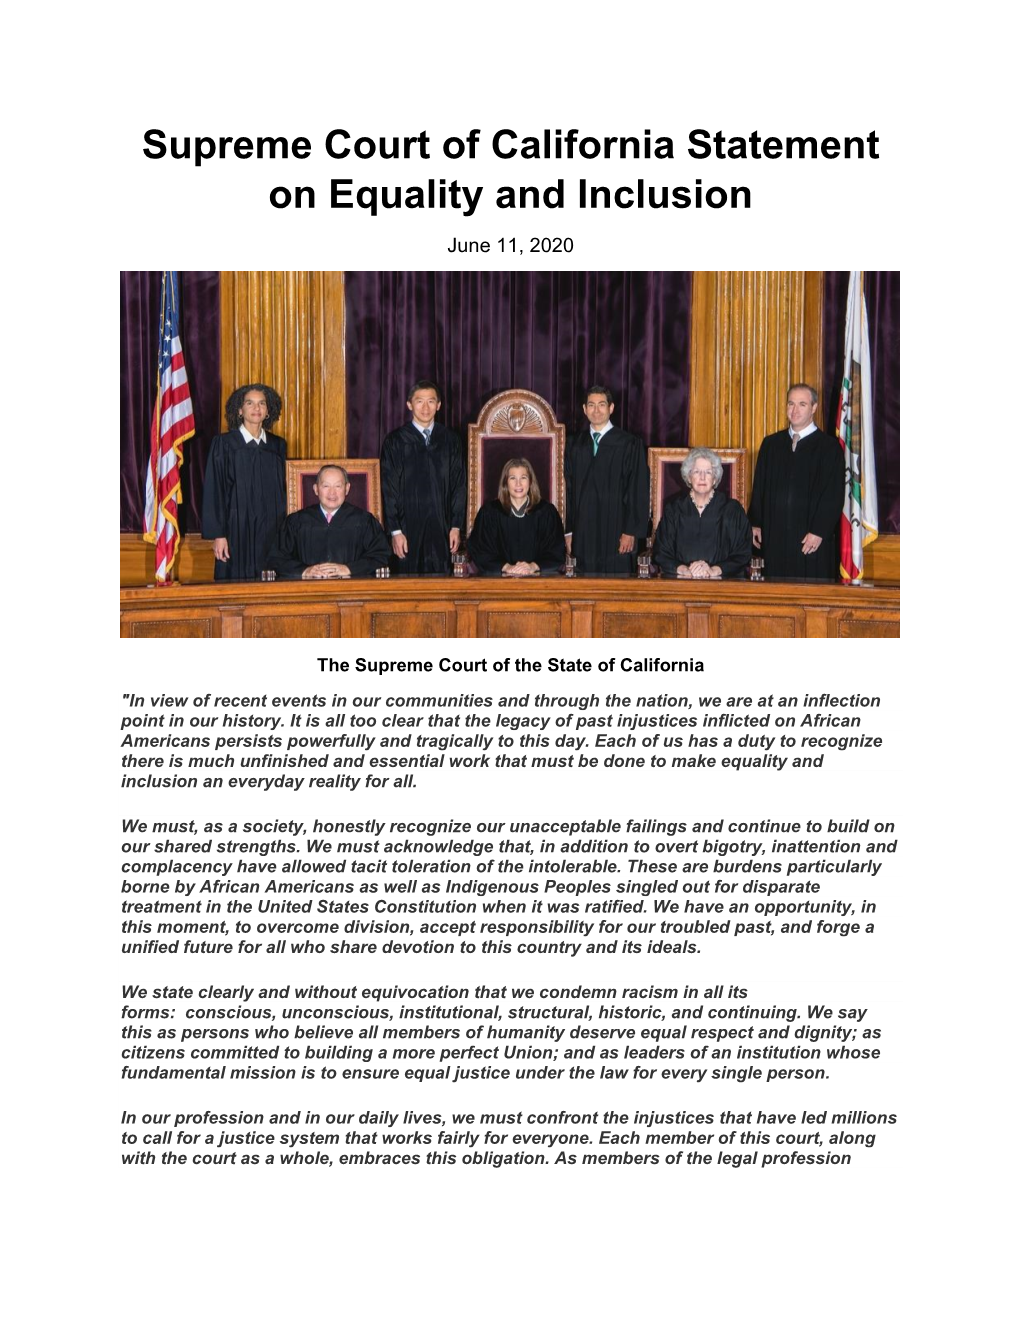 Supreme Court of California Statement on Equality and Inclusion June 11, 2020